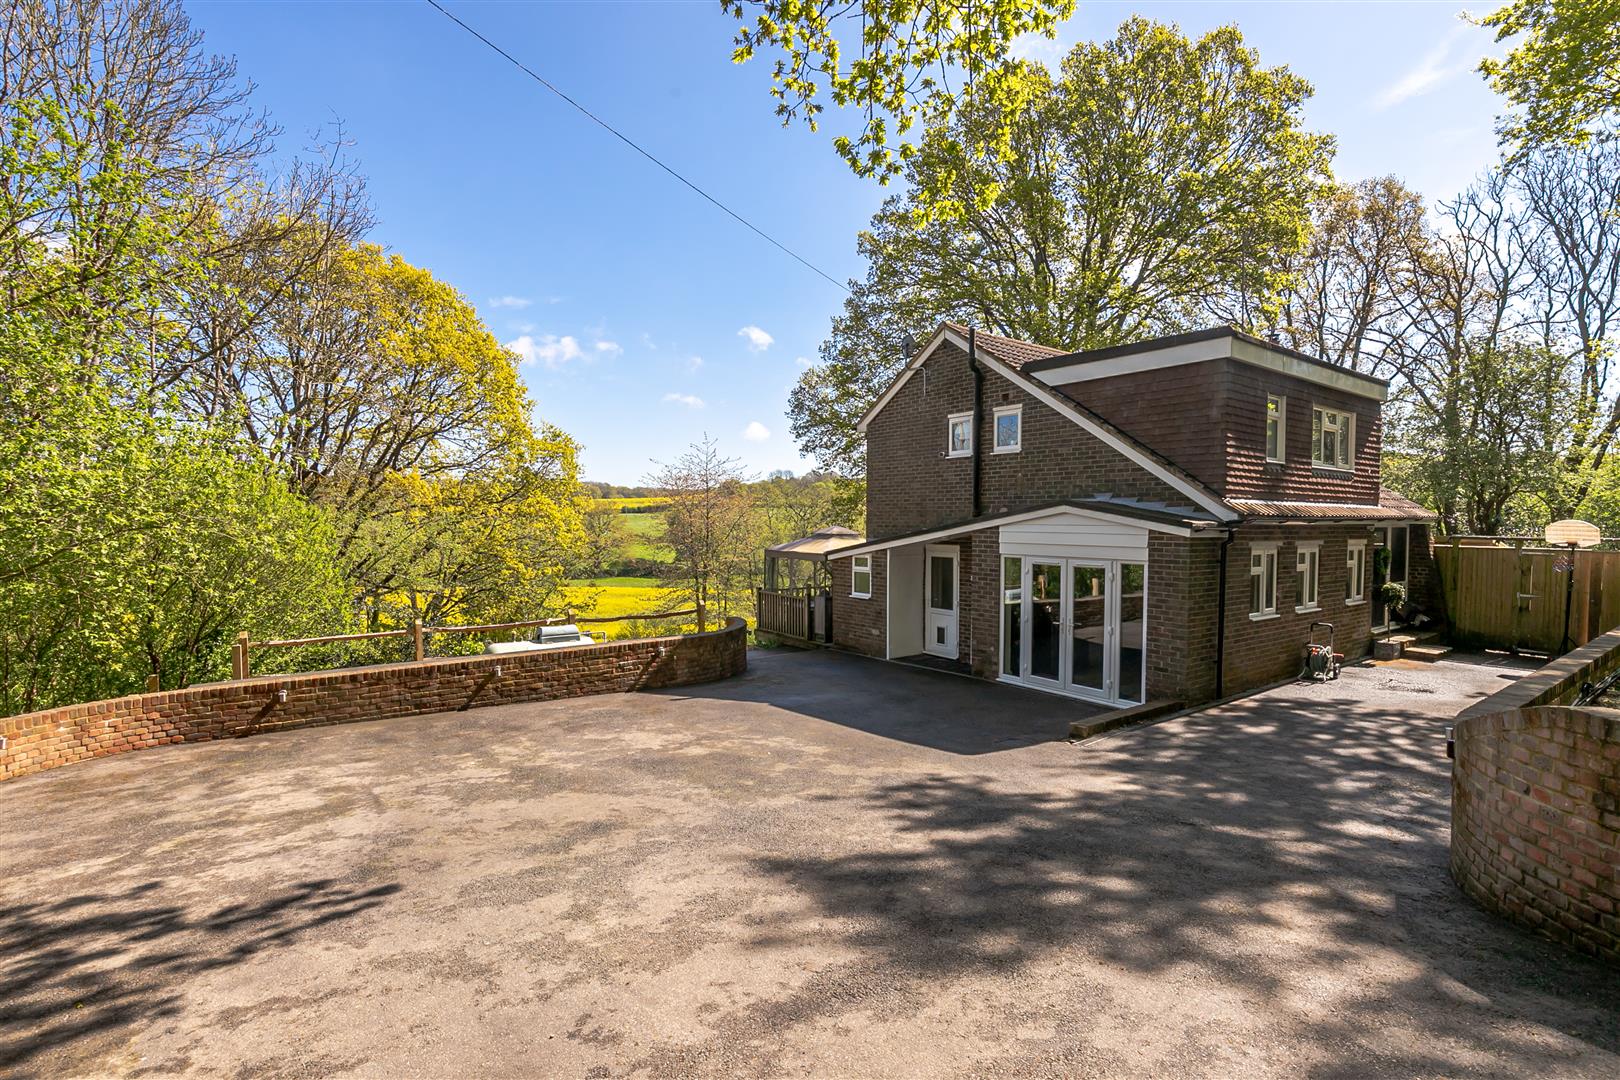 4 bed detached house for sale in Chapel hill, Crowhurst, Battle  - Property Image 1